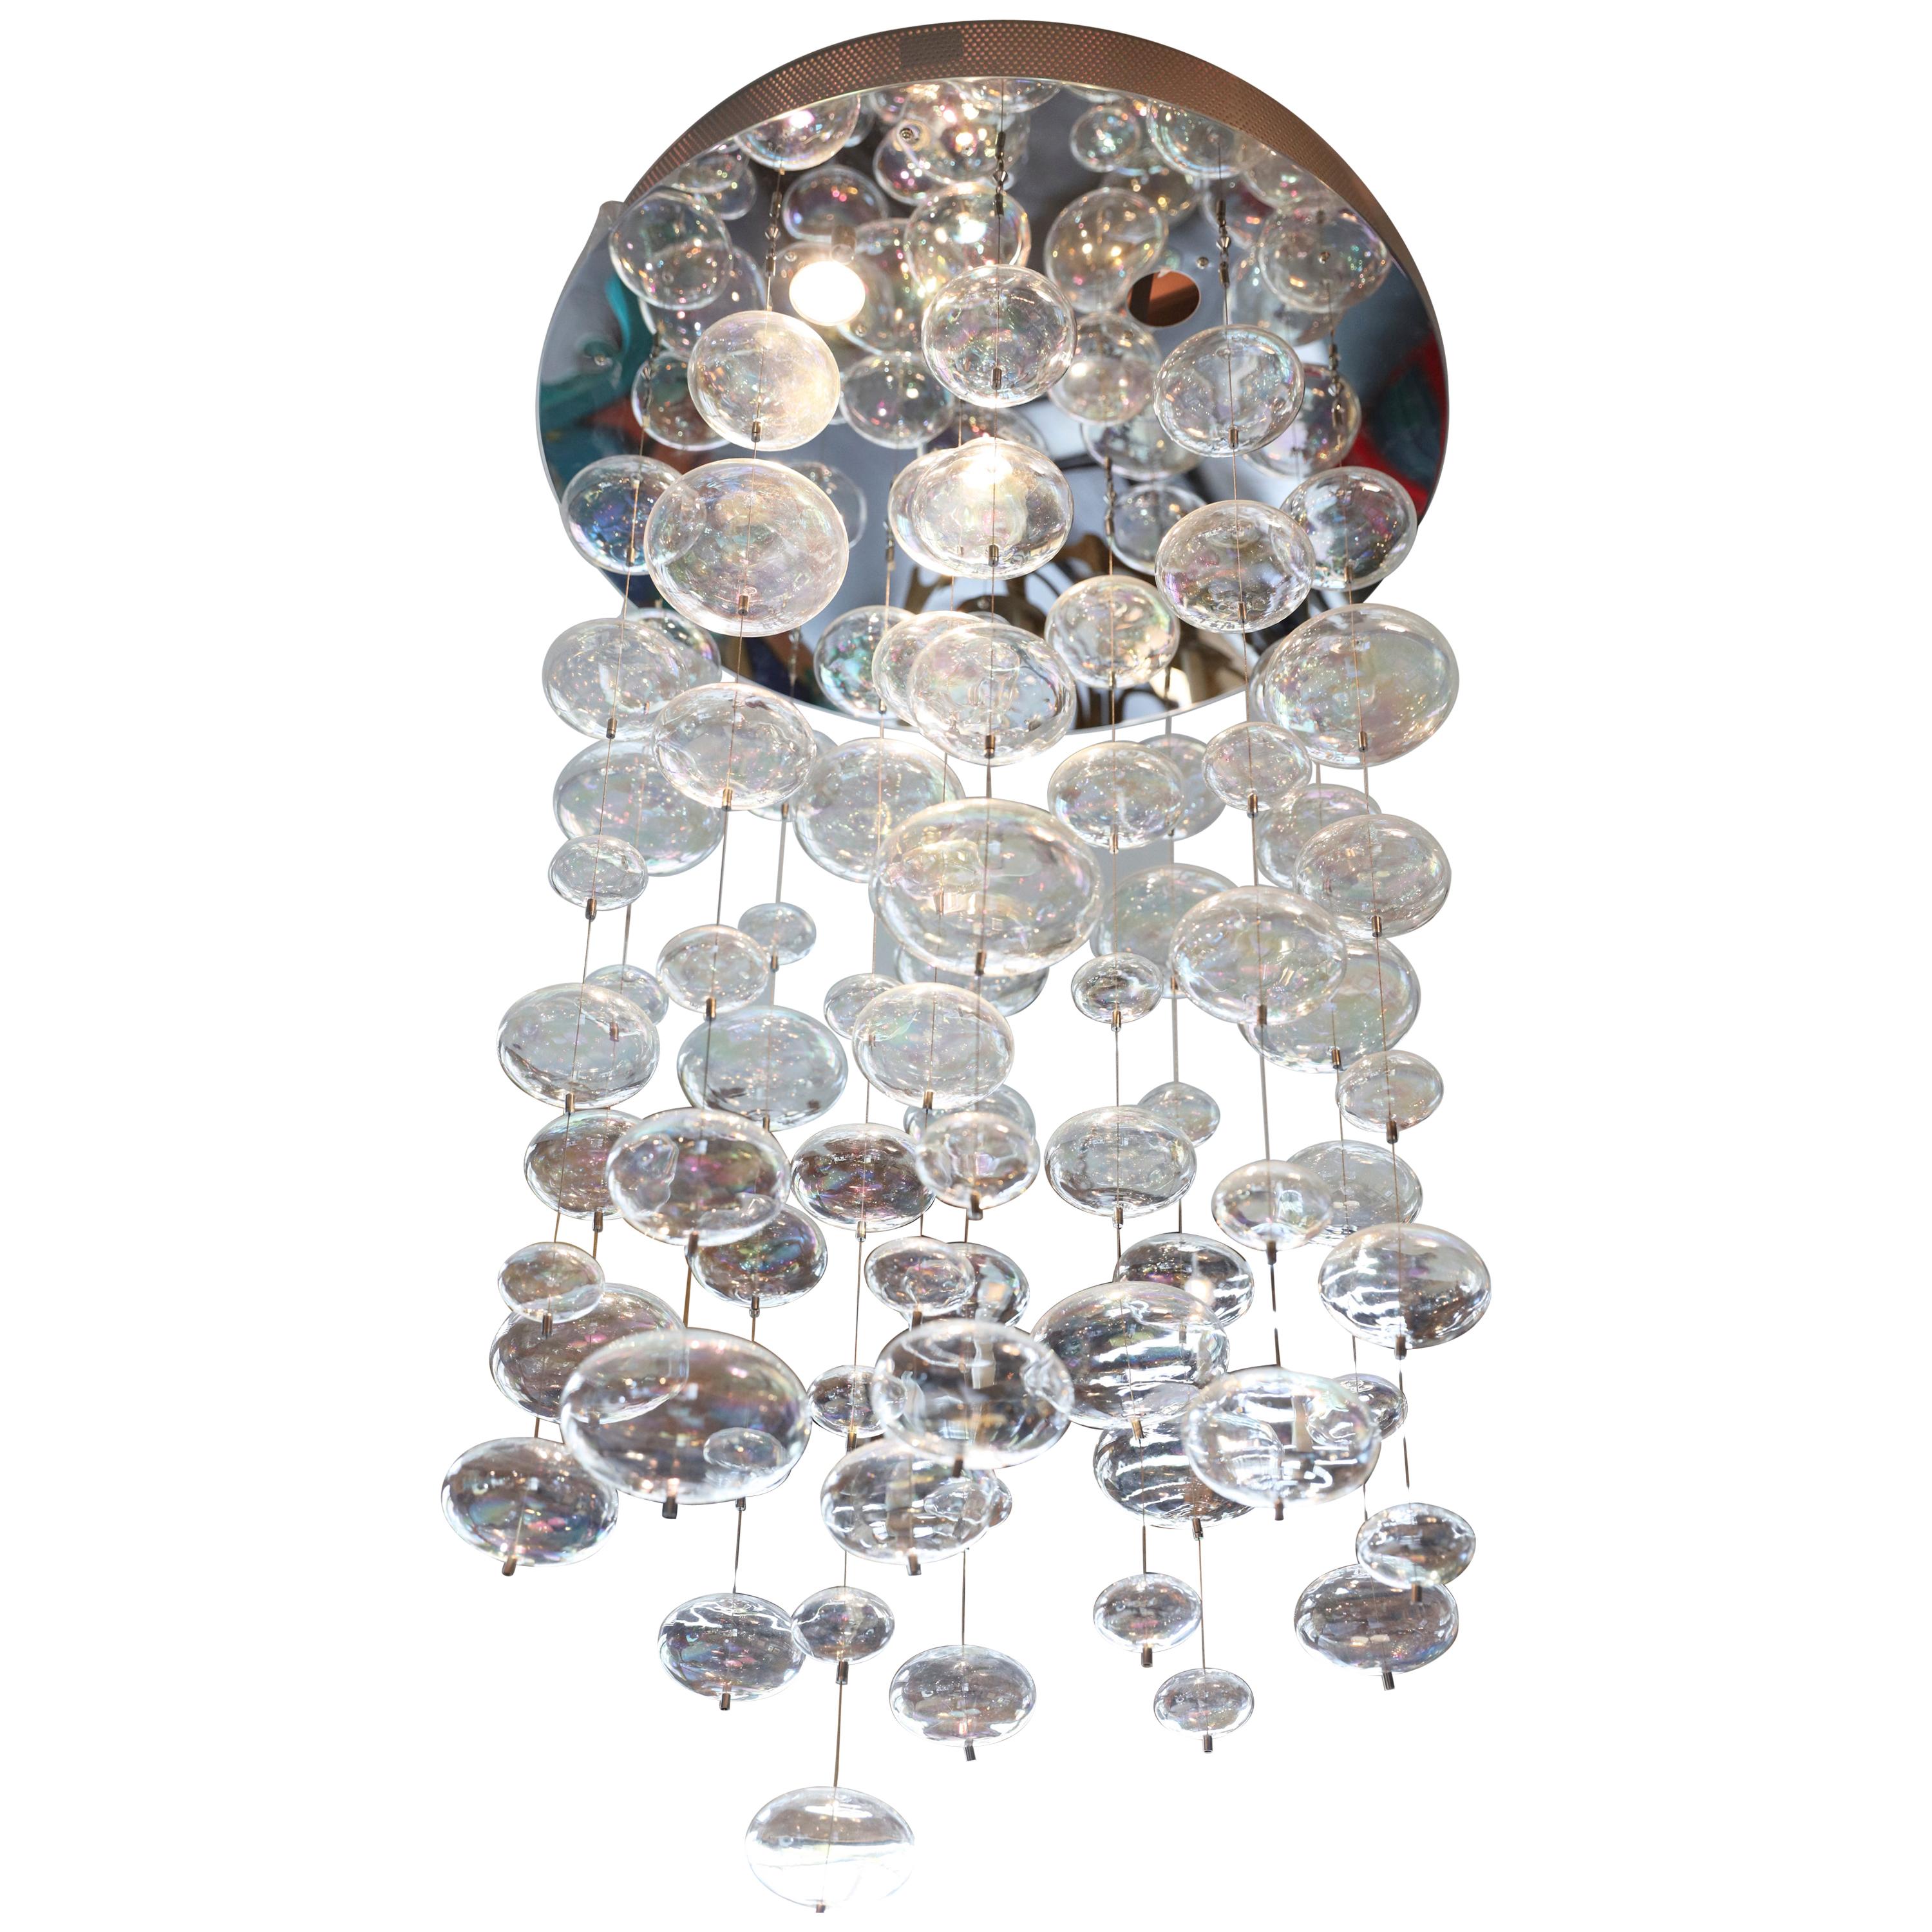 Round Mirrored Ceiling Fixture w/ Iridescent Glass Bubbles